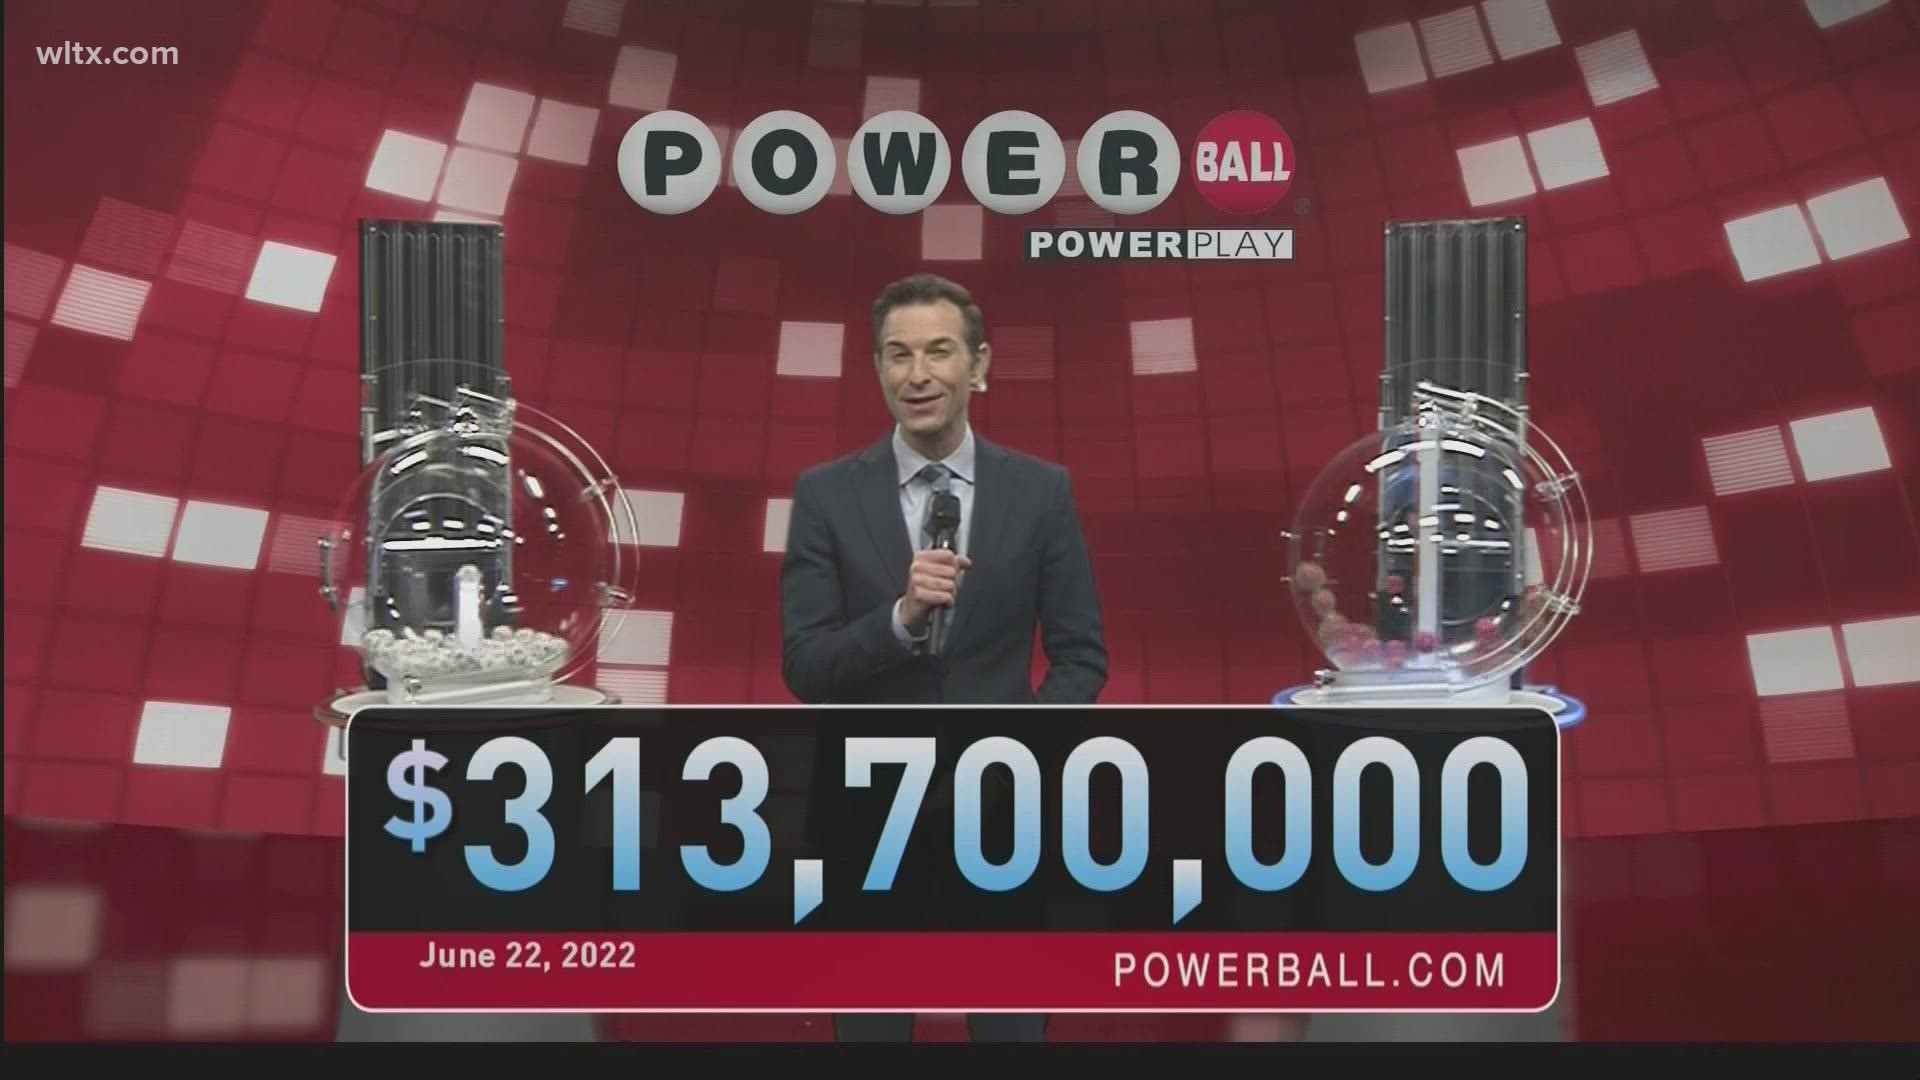 Here are the winning Powerball numbers for Wednesday, June 22, 2022.